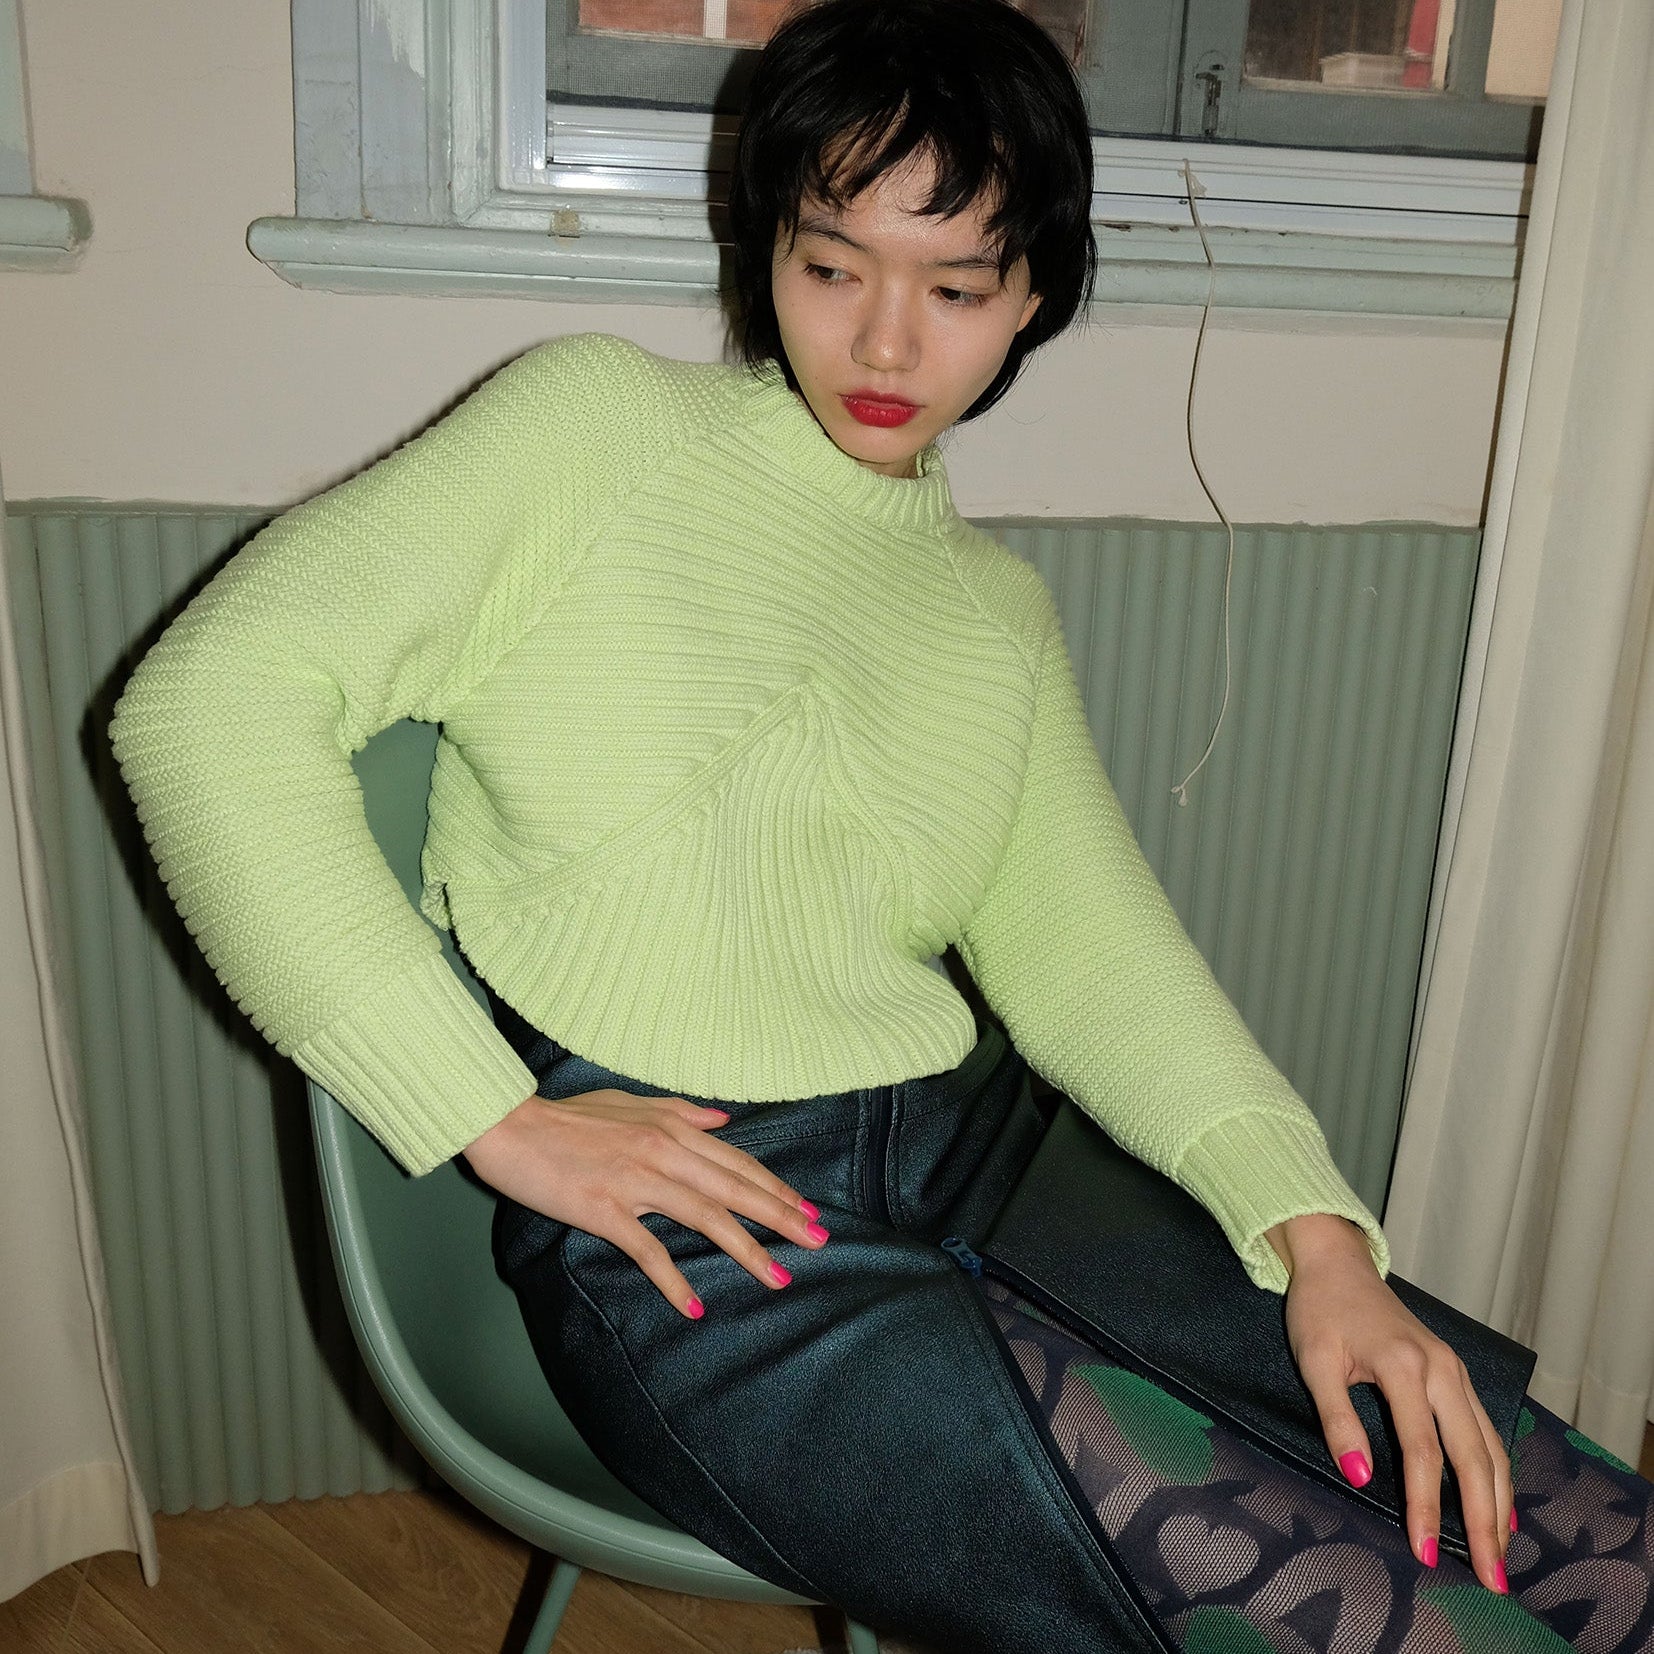 Shell textured coarse knitted jumper in light green